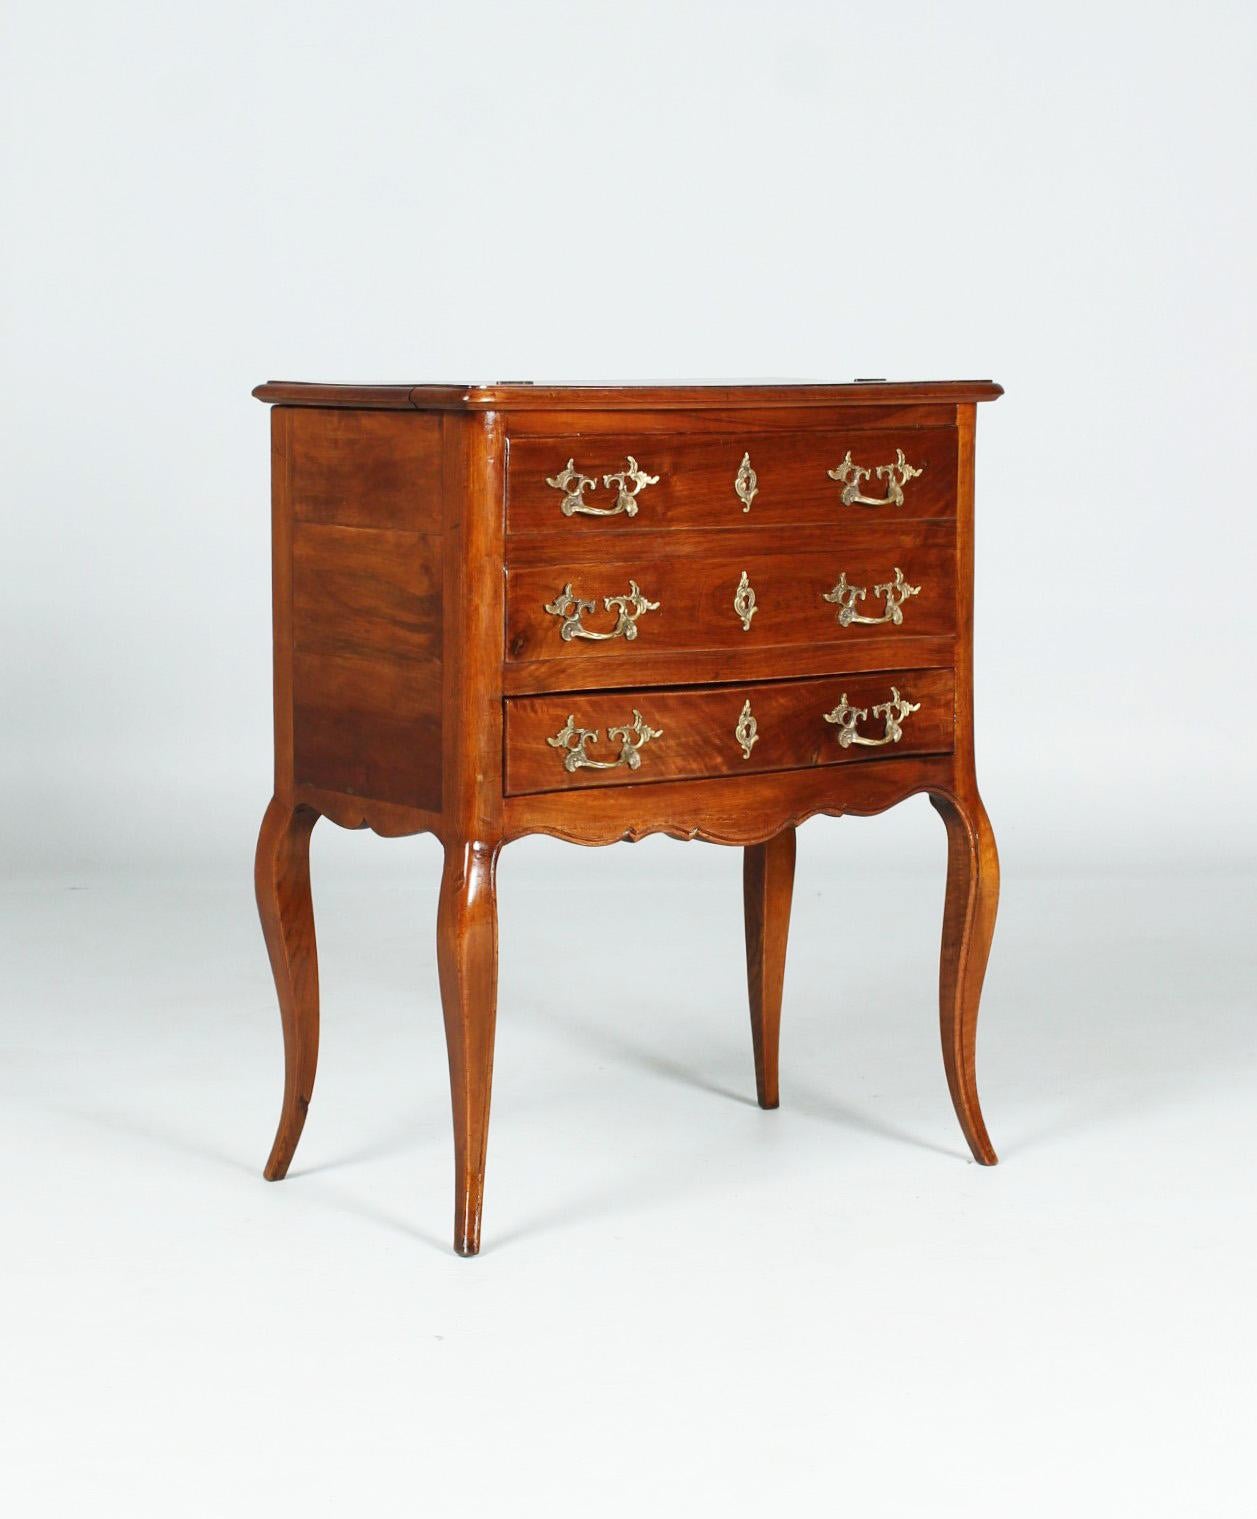 Small antique secretary, lady's desk
France
Walnut
around 1860

Dimensions: H x W x D: 90 x 59 x 53 cm

Description:
Quite extraordinary small piece of transforming furniture made of solid walnut.

When closed, we see an obviously